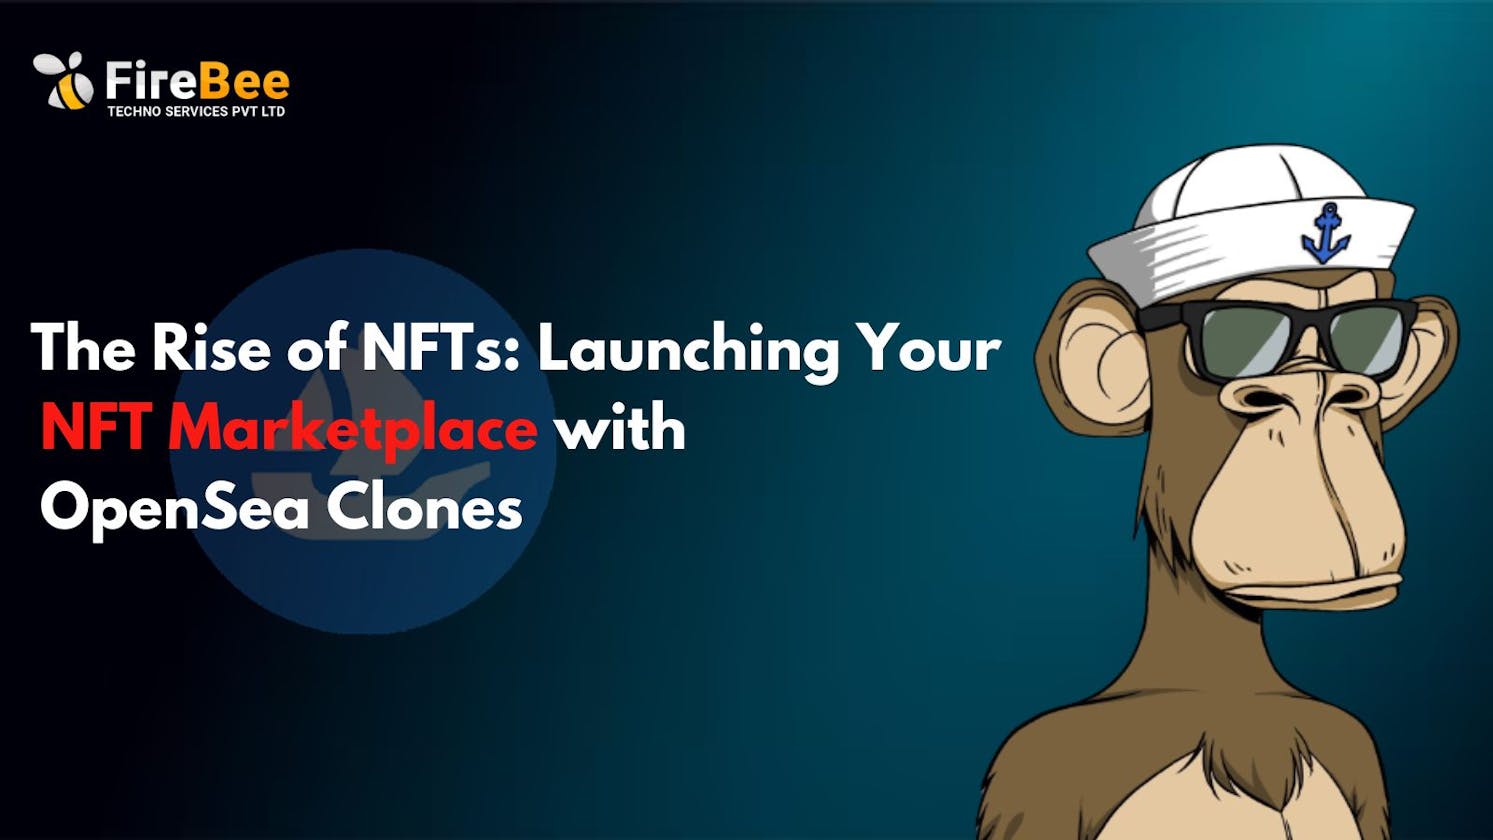 The Rise of NFTs: Launching Your NFT Marketplace with OpenSea Clones